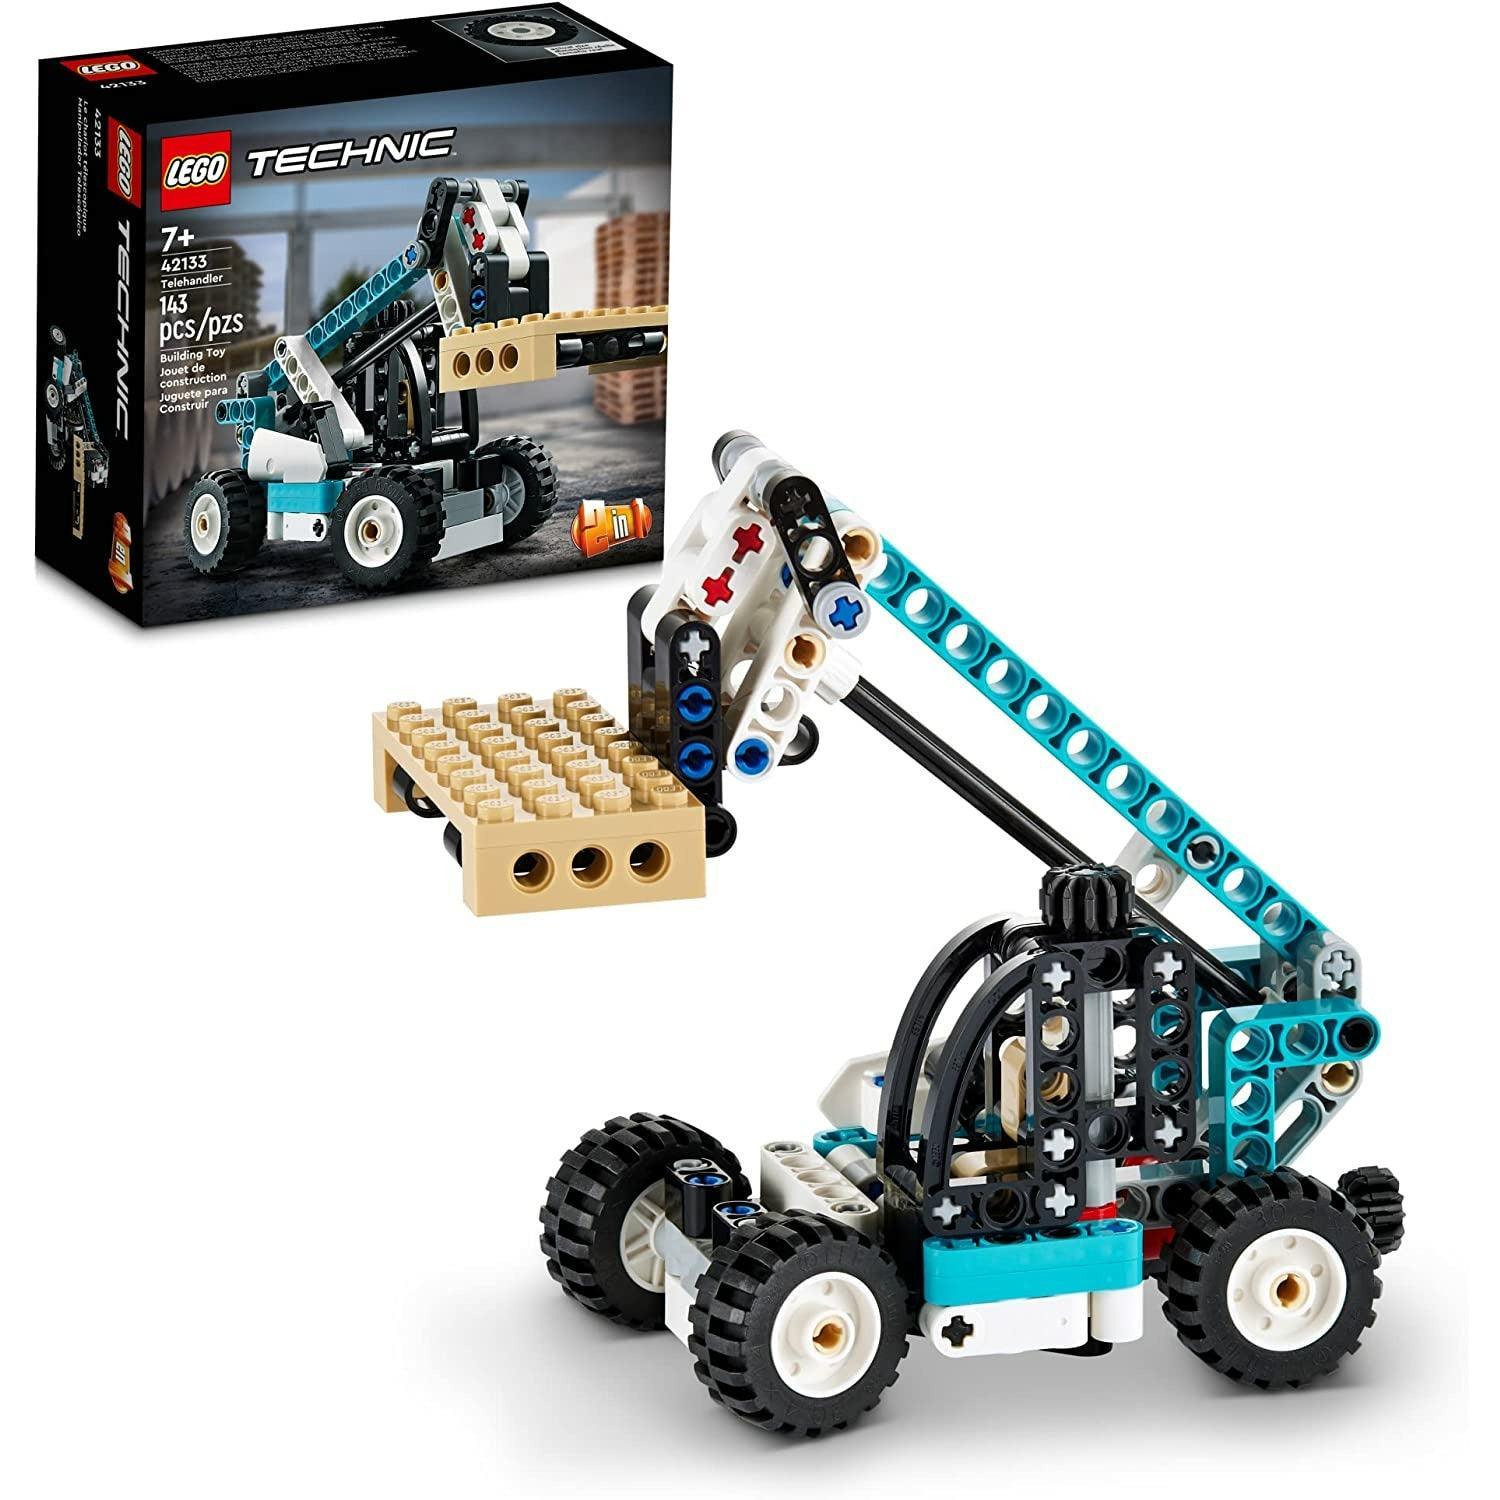 LEGO Technic Telehandler 42133 Model Building Kit; 2-in-1 Rebuilds into a Tow Truck Toy Model (143 Pieces) - BumbleToys - 8+ Years, 8-13 Years, Boys, LEGO, Motorcycle, OXE, Technic